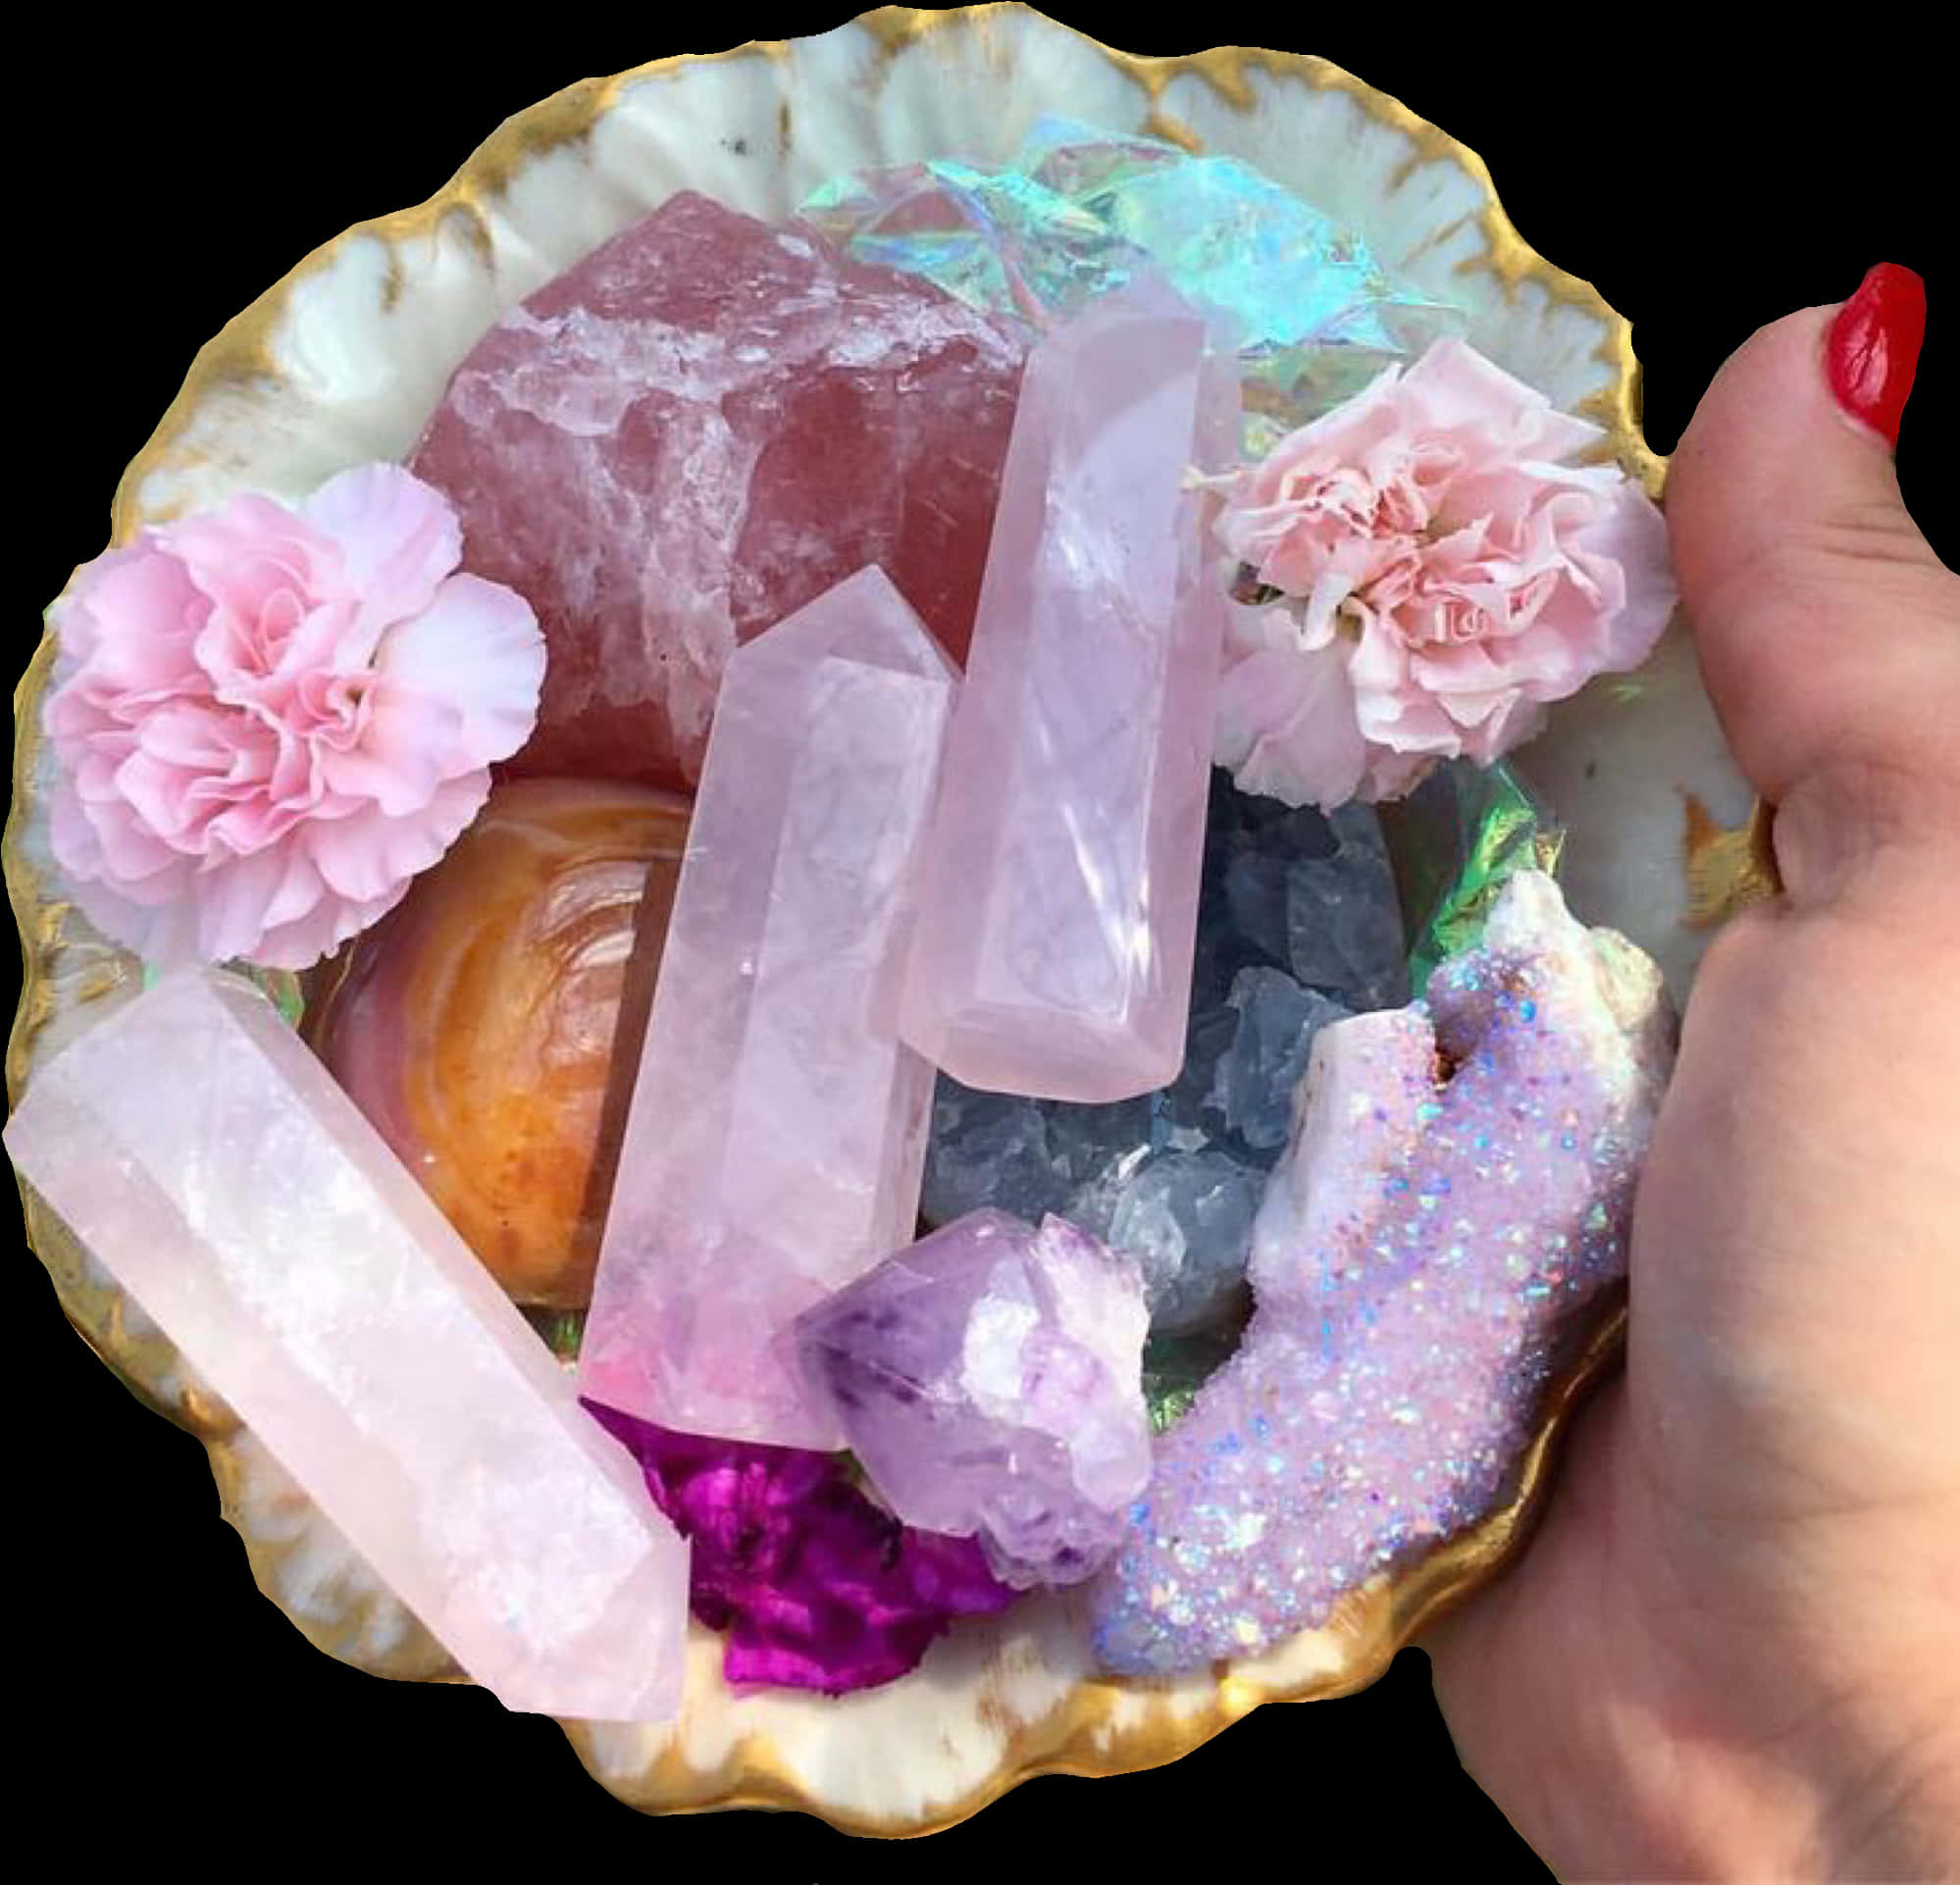 A Hand Holding A Bowl Of Crystals And Flowers